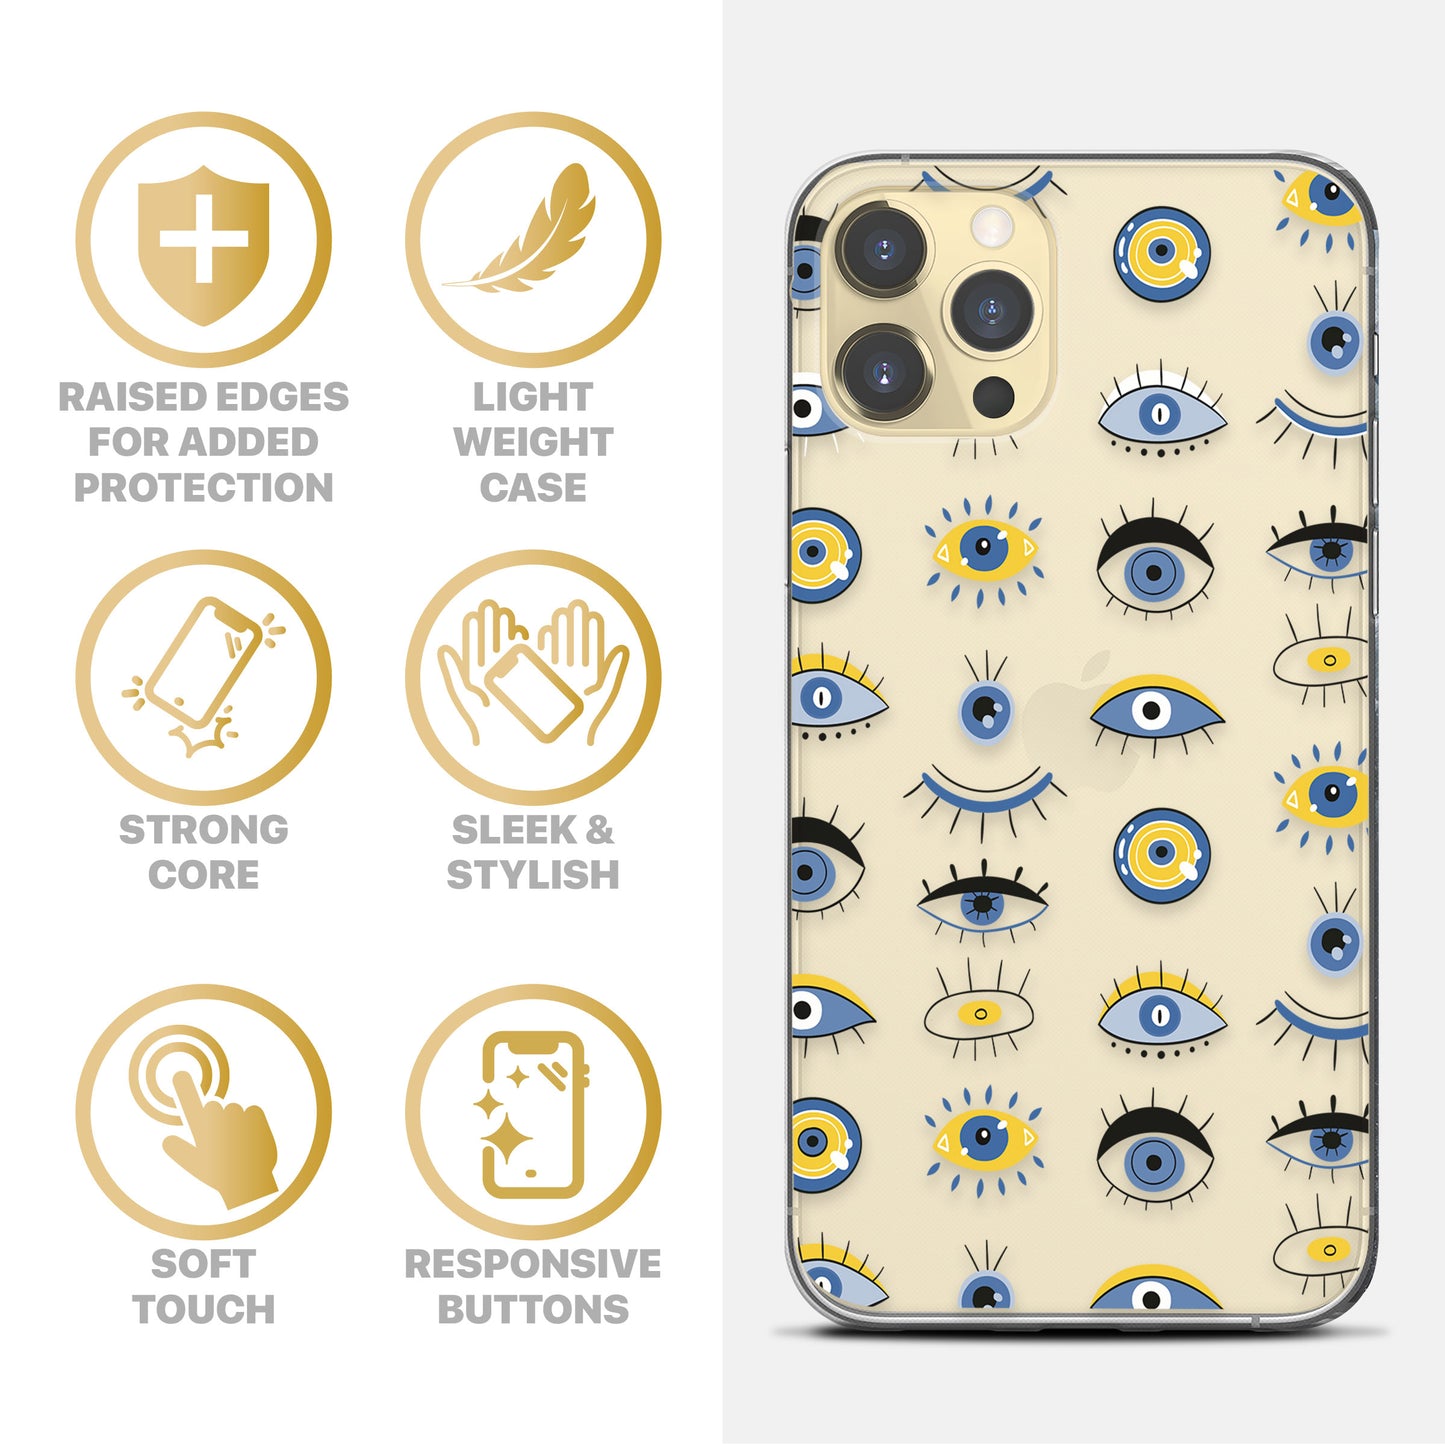 TPU Clear case with (Evil Eyes Istanbul) Design for iPhone & Samsung Phones